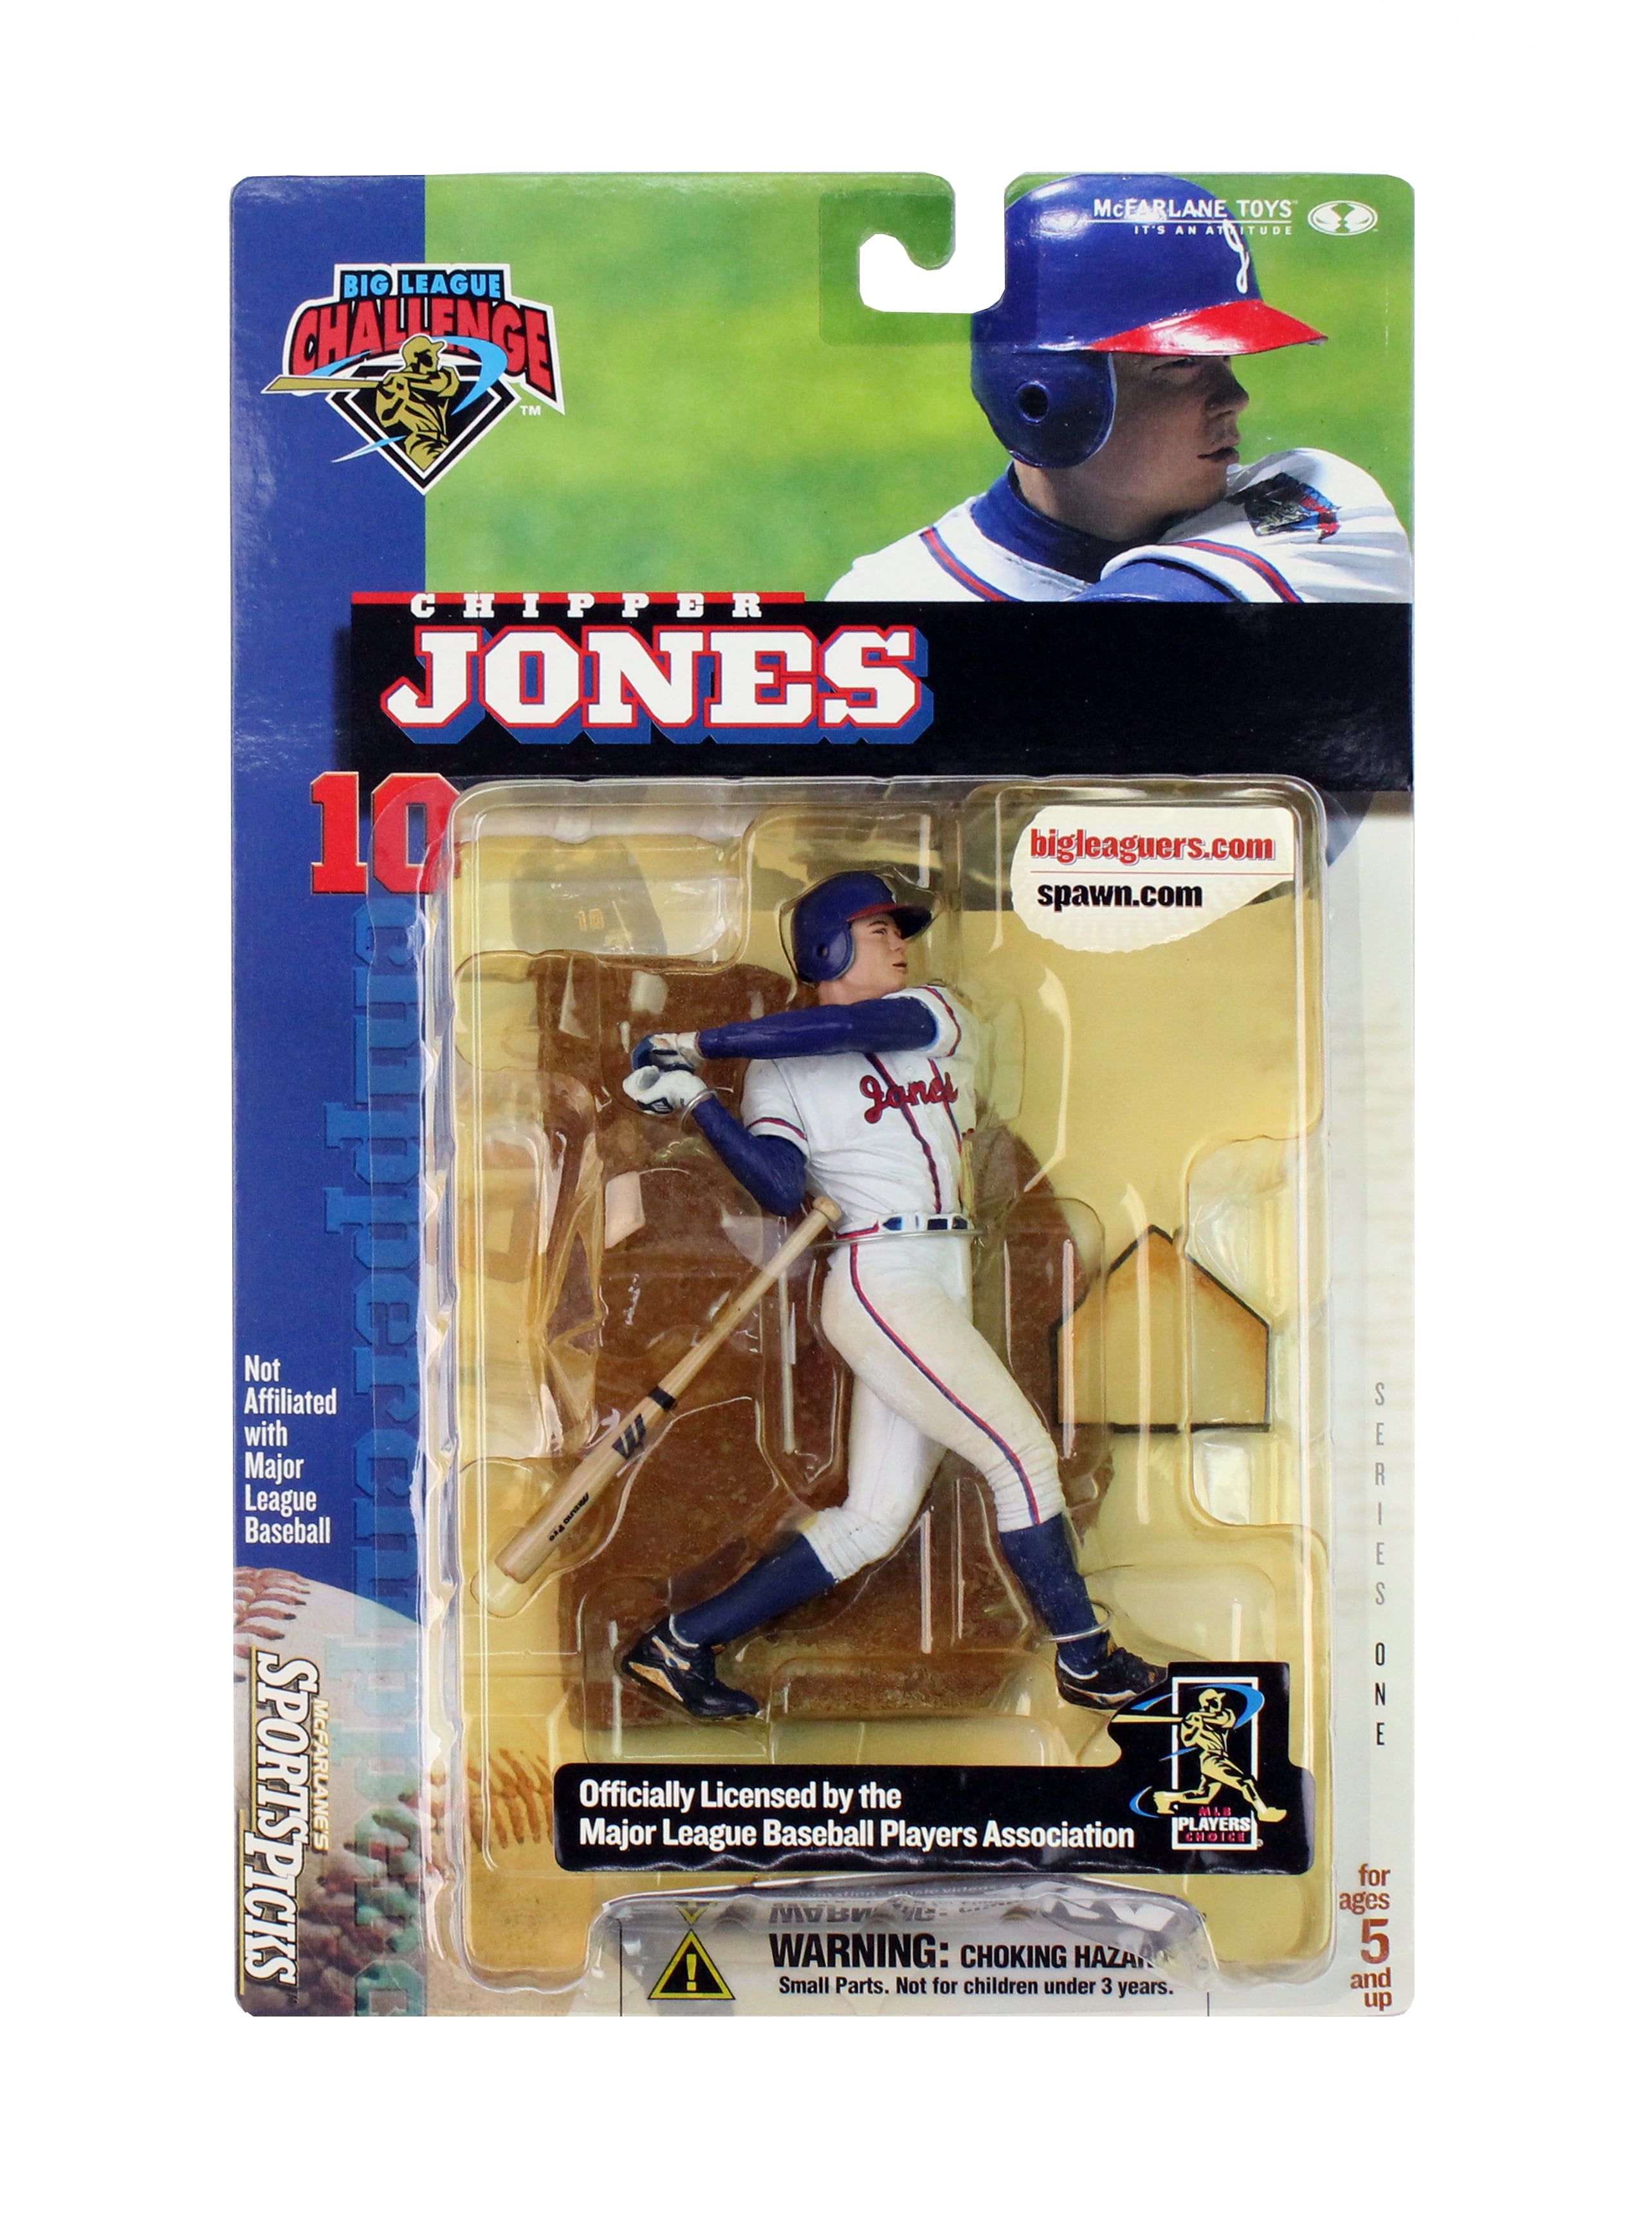 MLB Playmakers Series 3 Action Figure Case